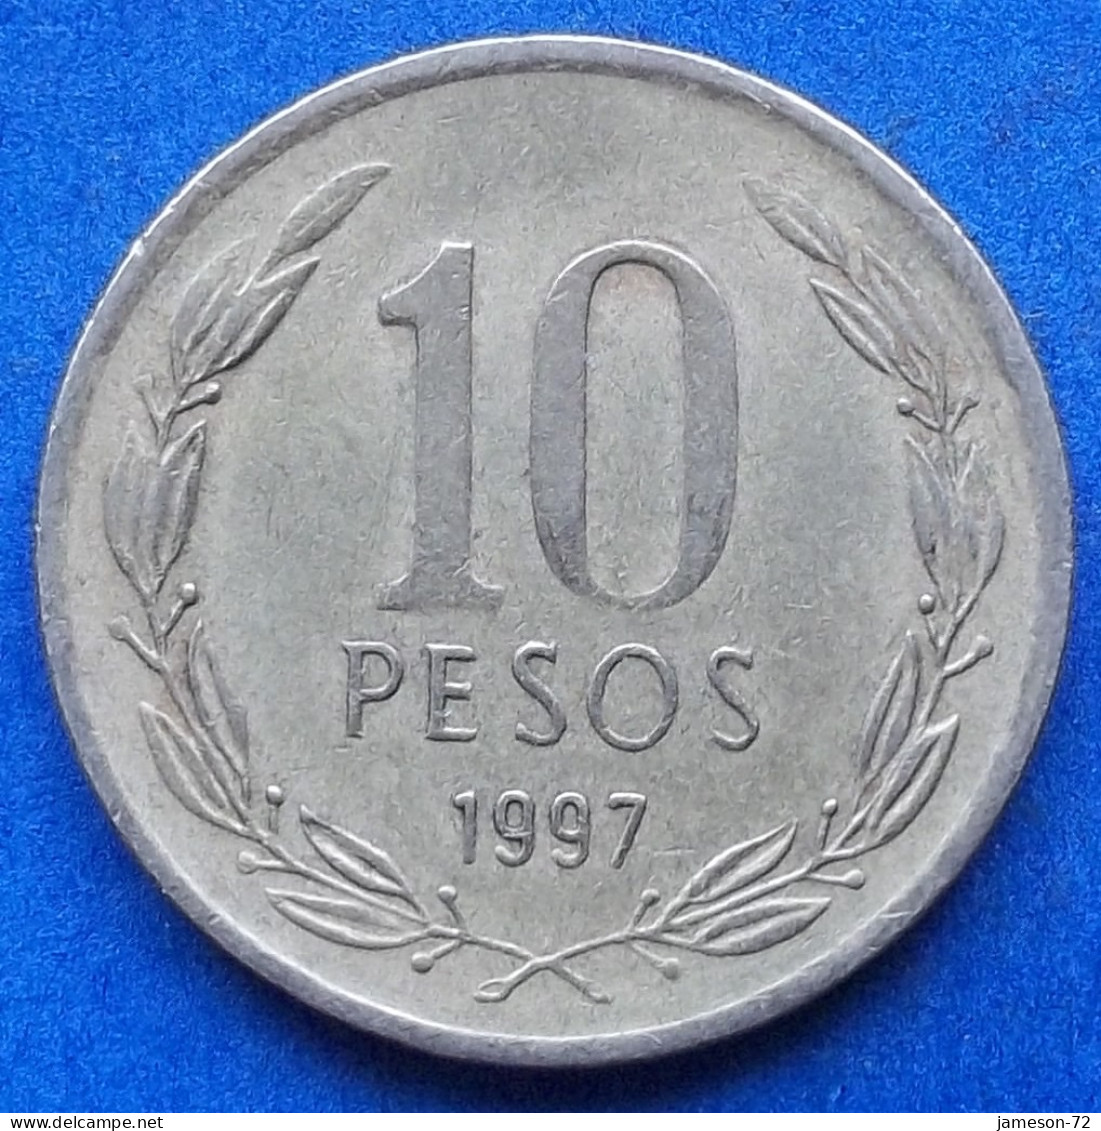 CHILE - 10 Pesos 1997 So KM# 228.2 Monetary Reform (1975) - Edelweiss Coins - Chile